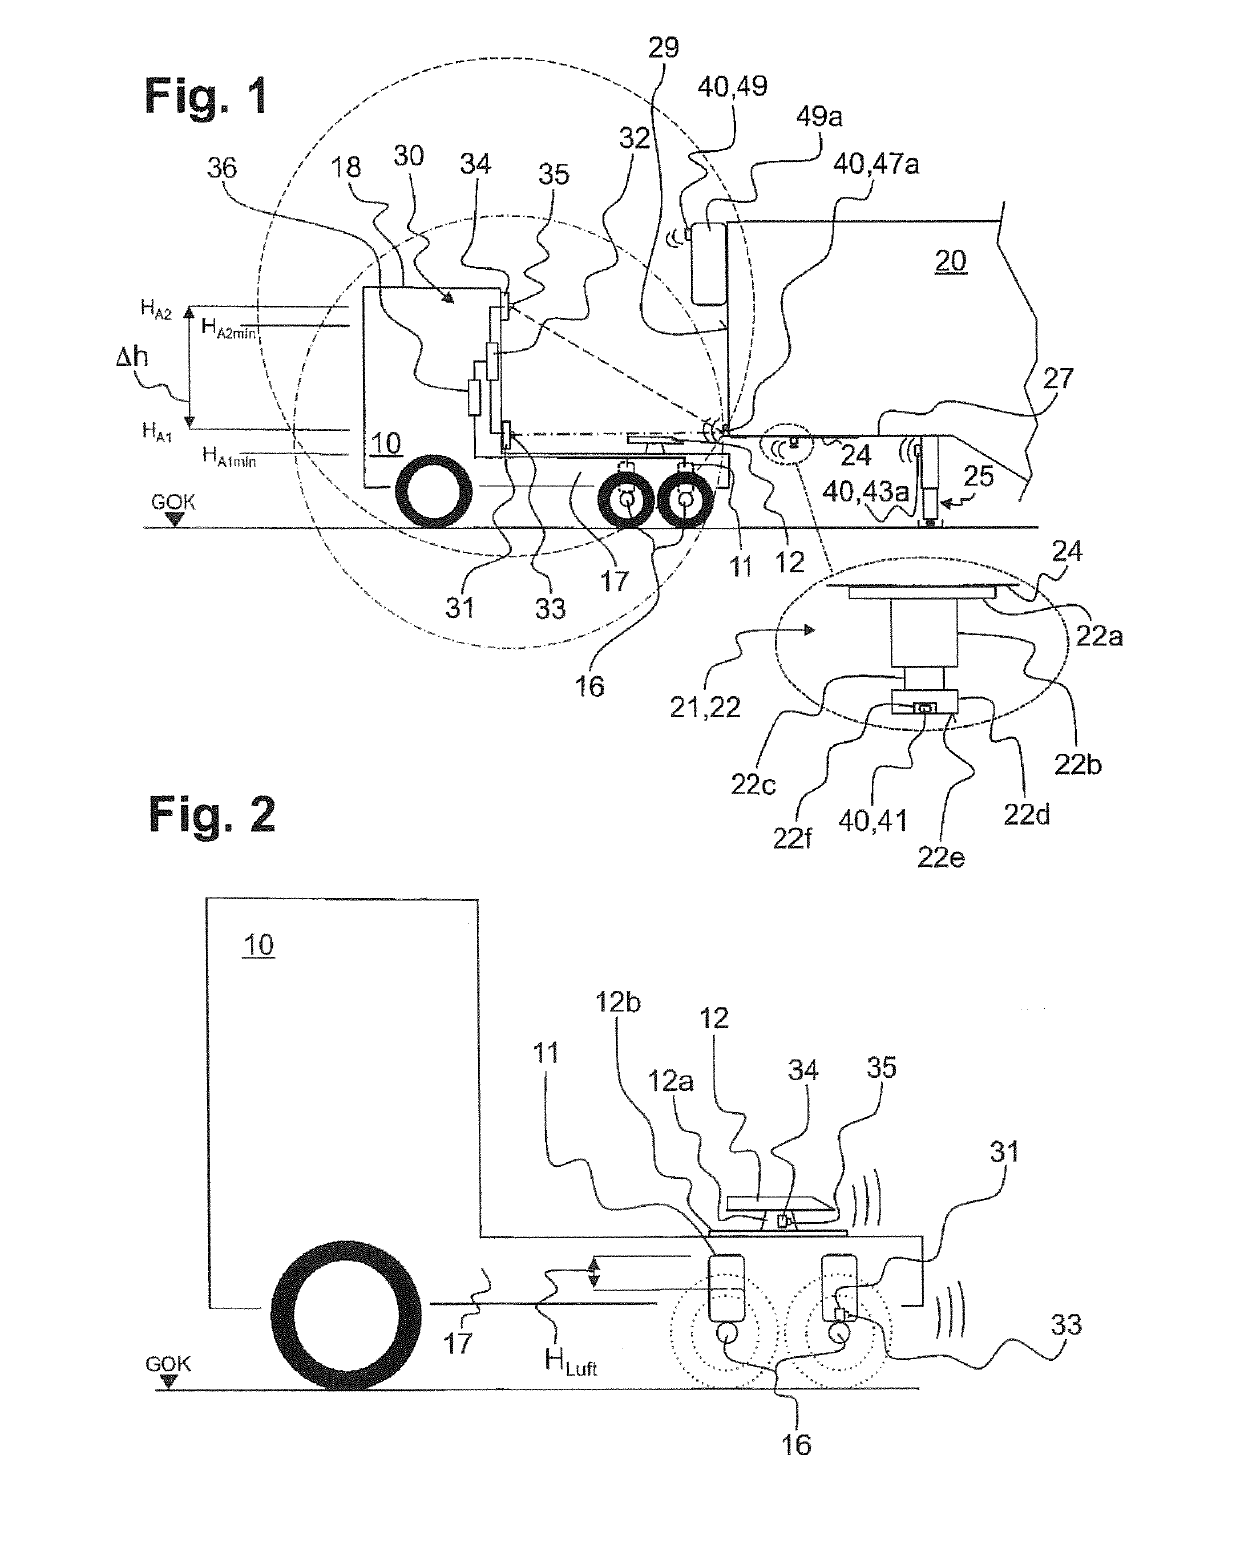 Device for Detecting the Position of a First or Second Vehicle to be Coupled Together